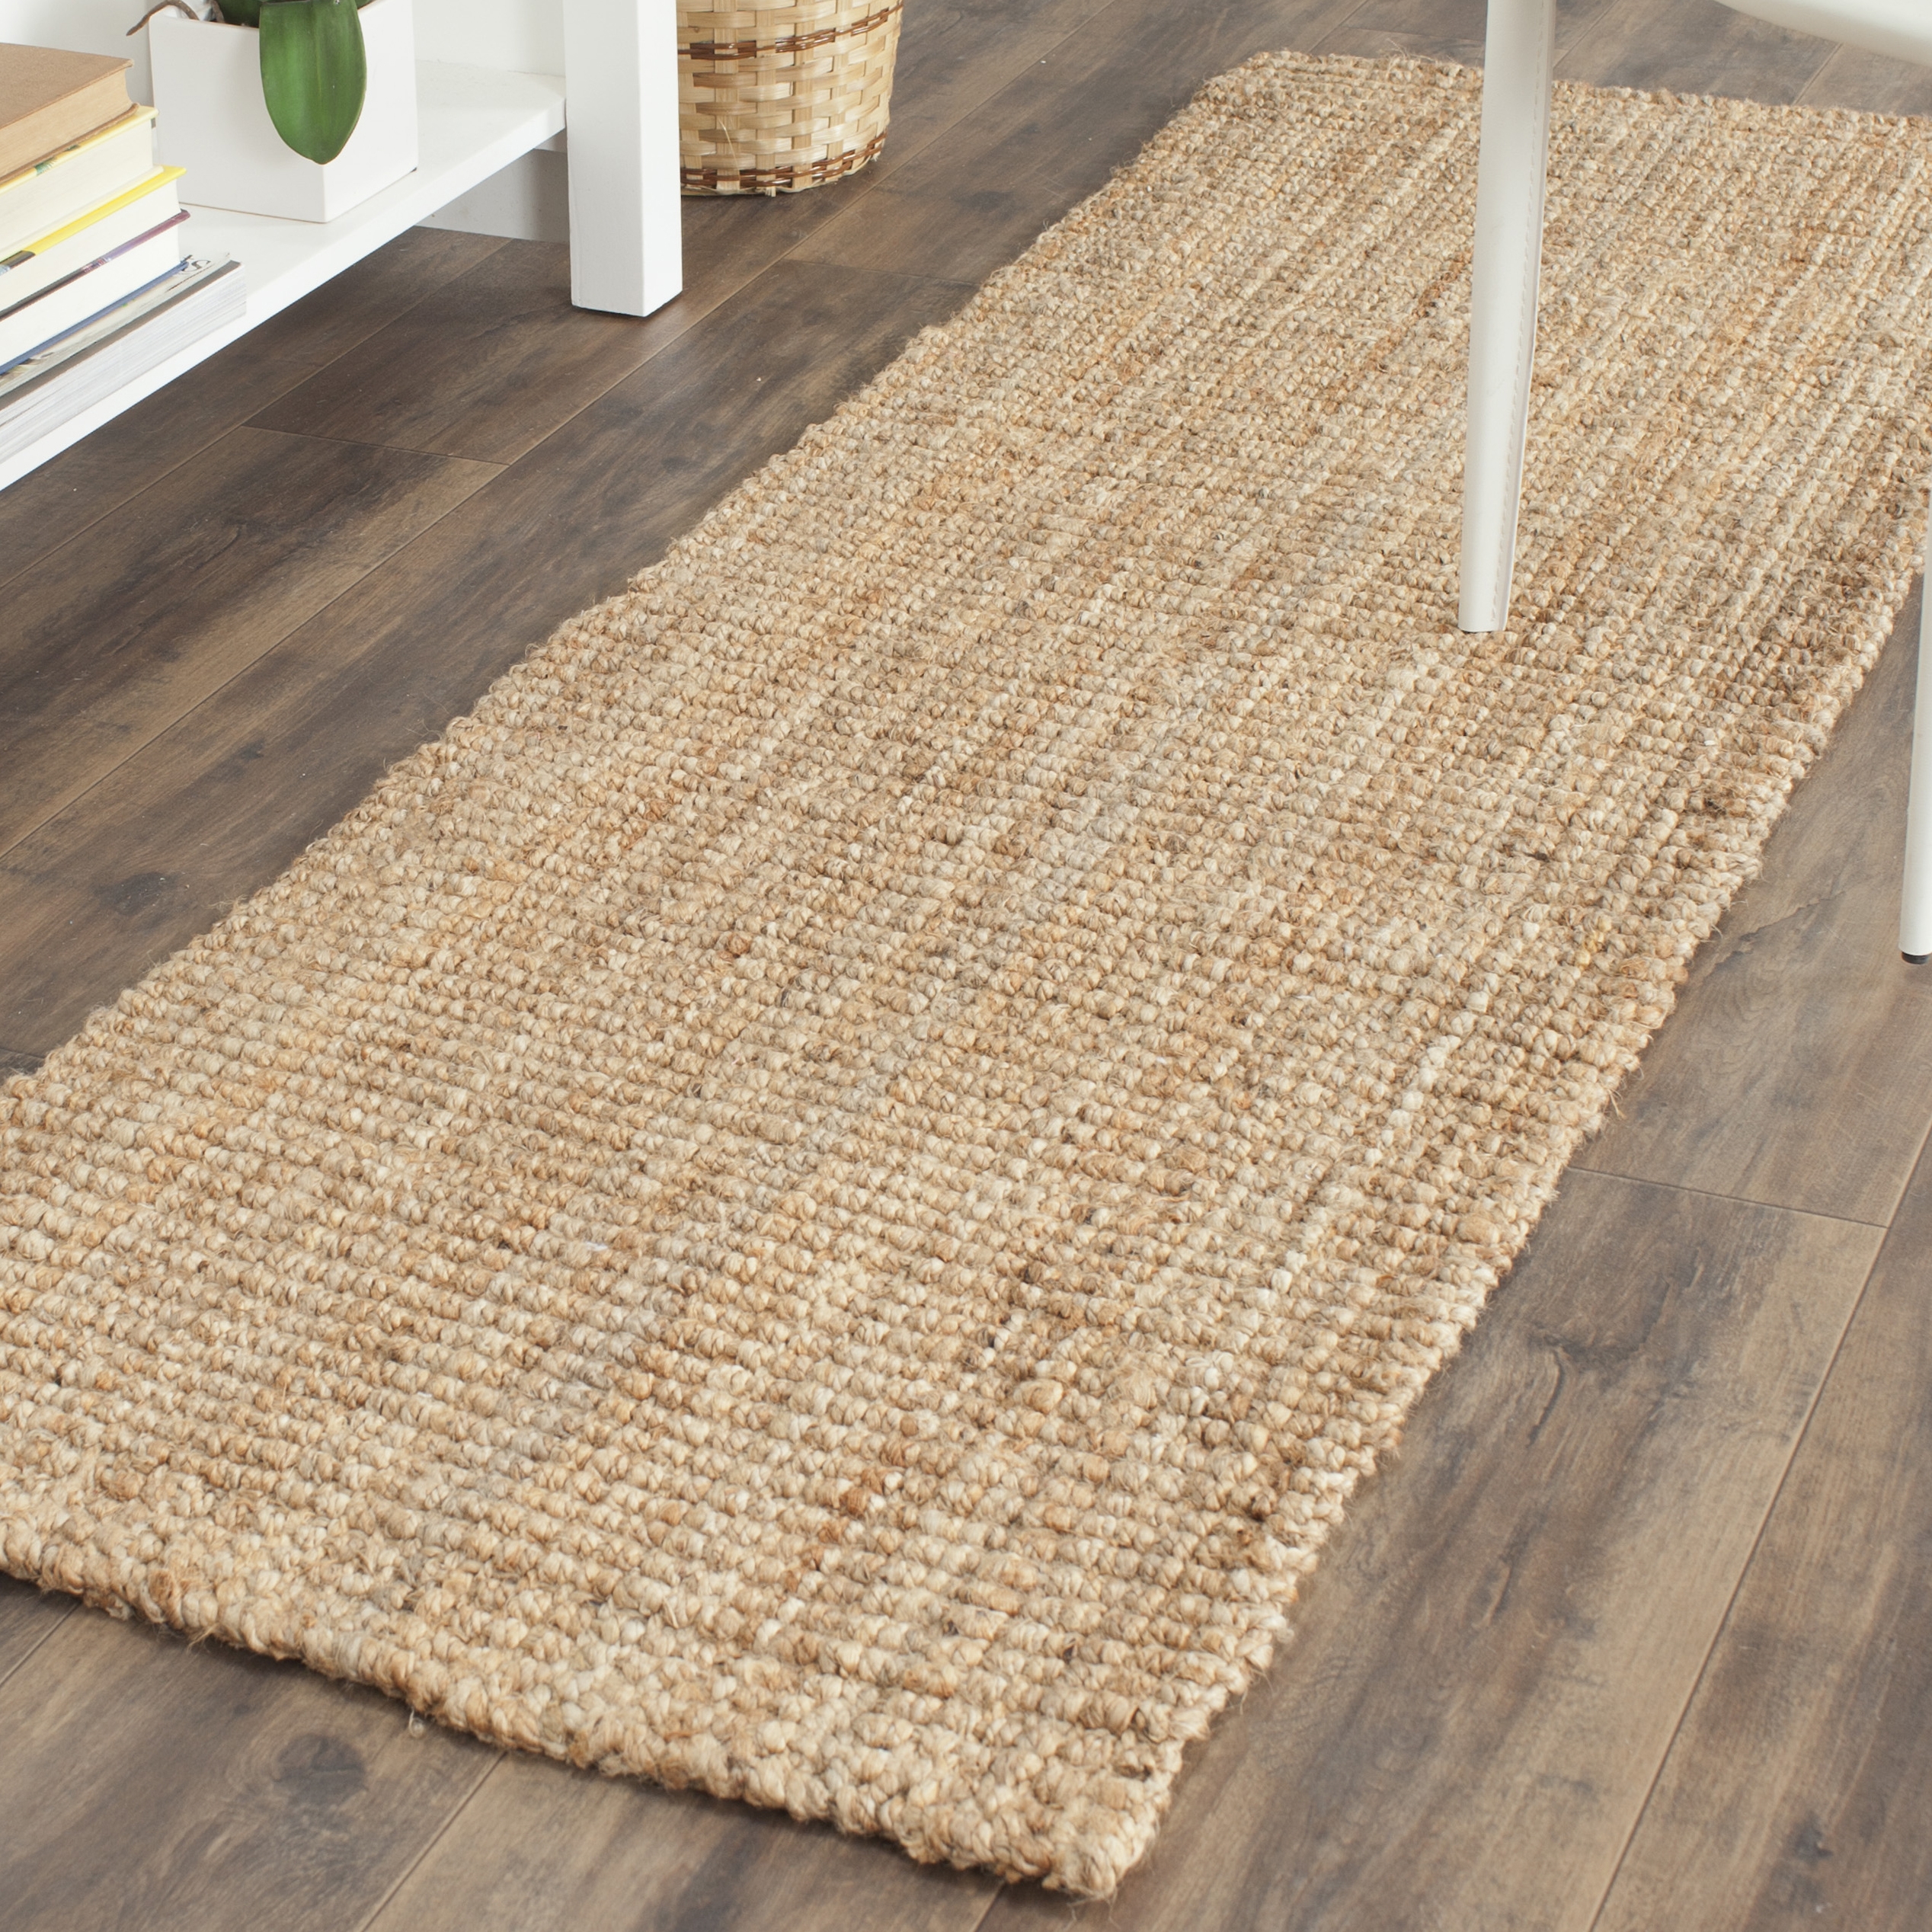 Arlo Home Hand Woven Area Rug, NF730C, Natural,  2' 3" X 11' - Image 1